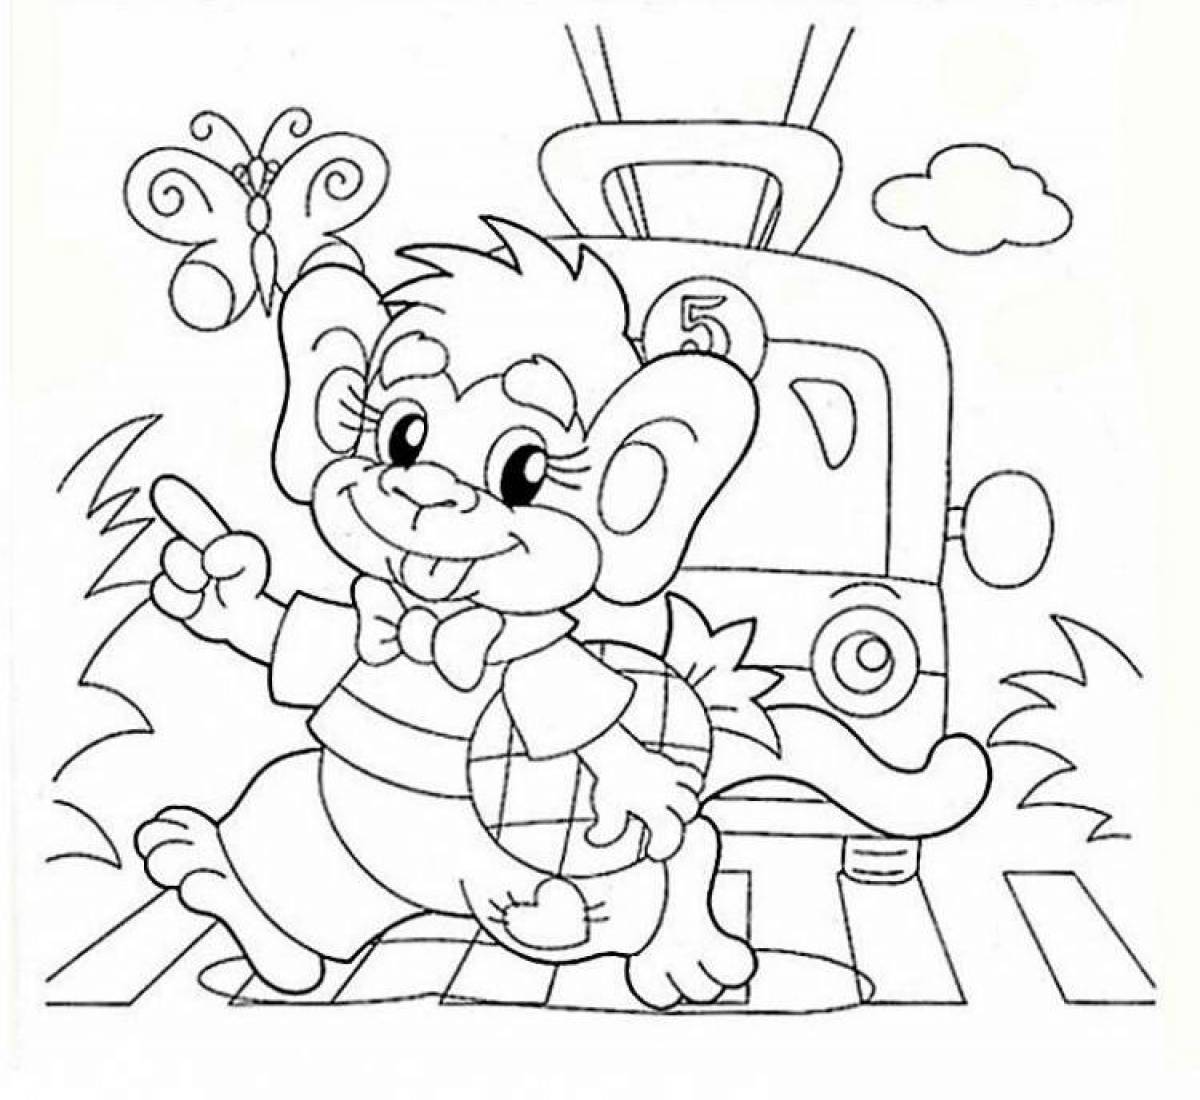 Stimulating traffic rules coloring pages for kids